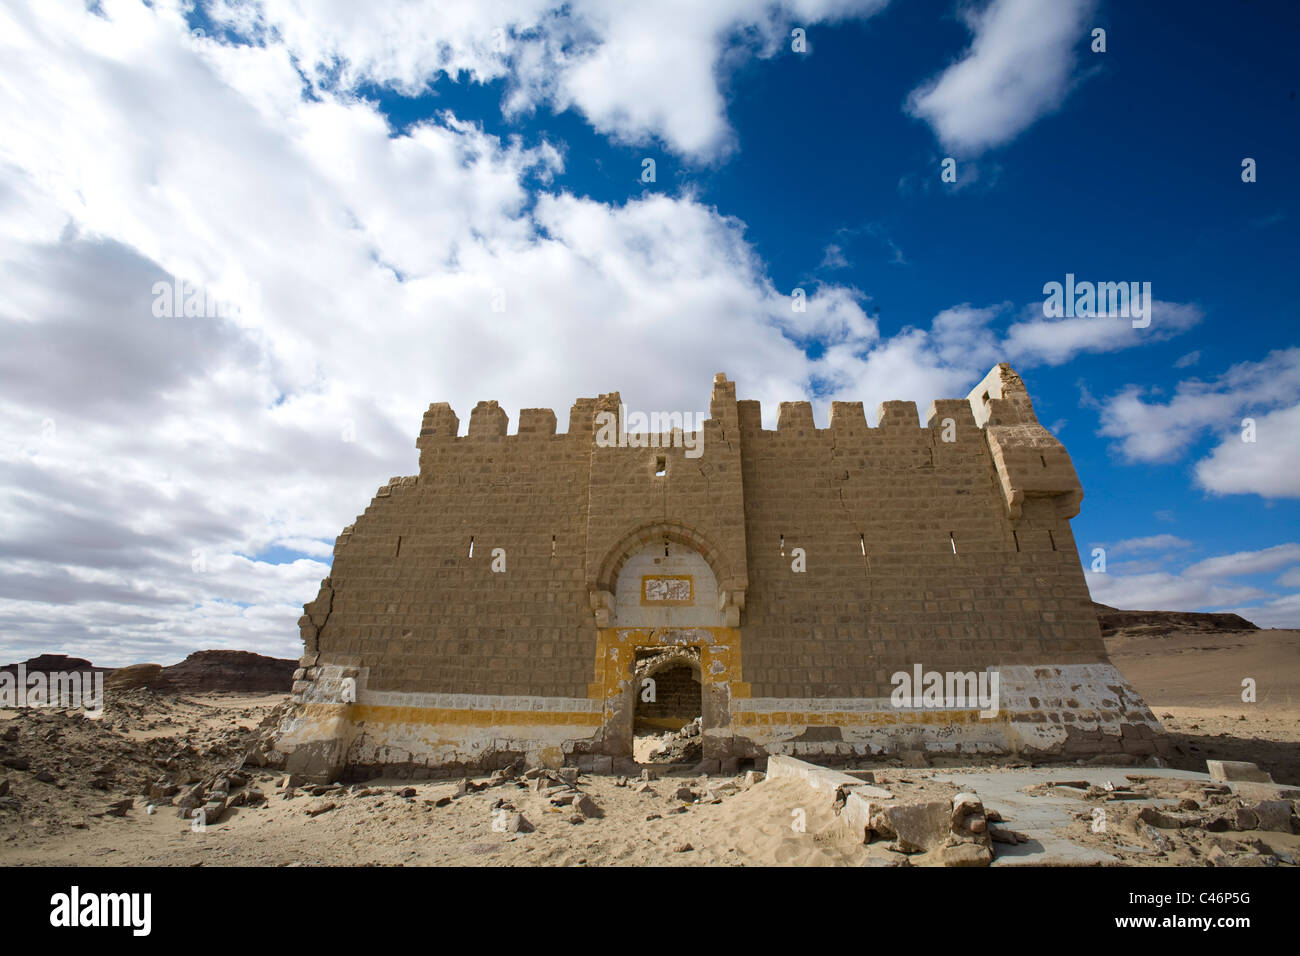 Photograph of an ancient castle in the Jordanian desert Stock Photo